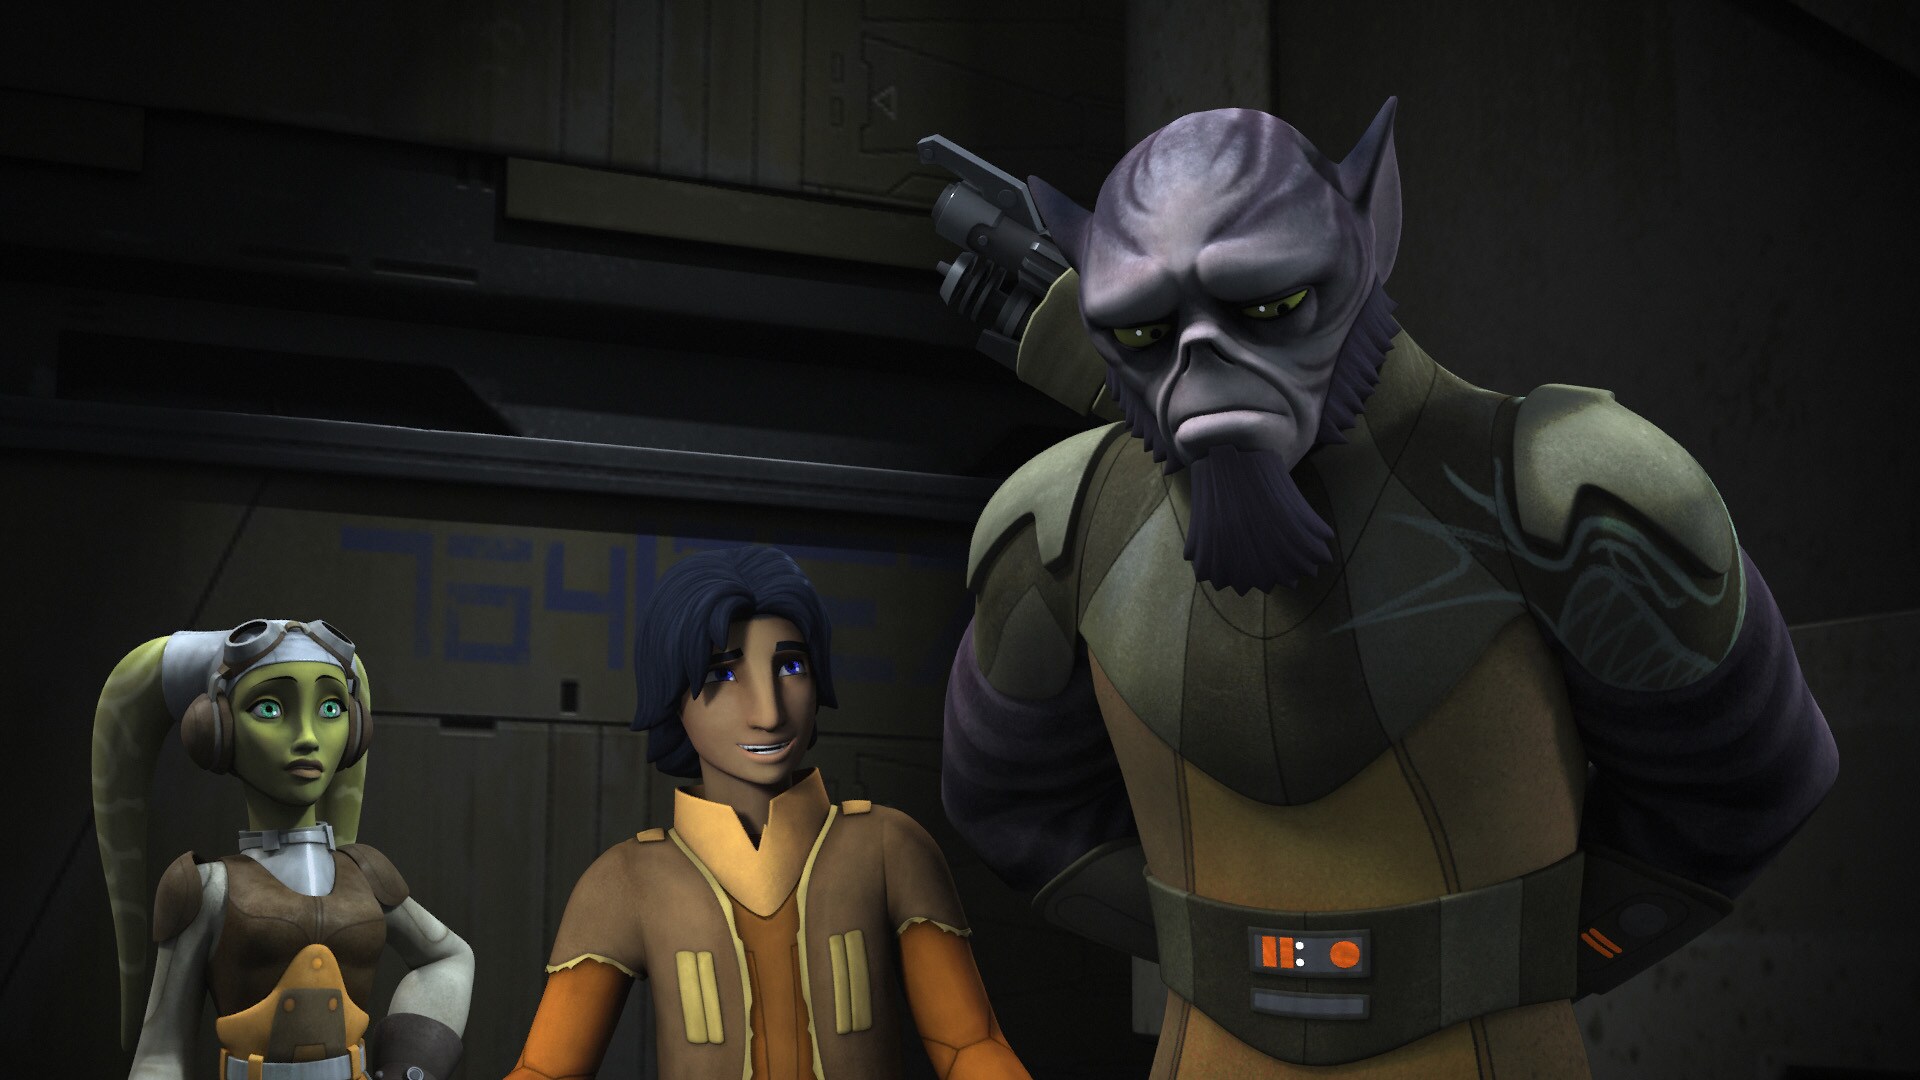 Zeb seems troubled. "It was all so long ago," he says of his captainship. Ezra, however, is deter...